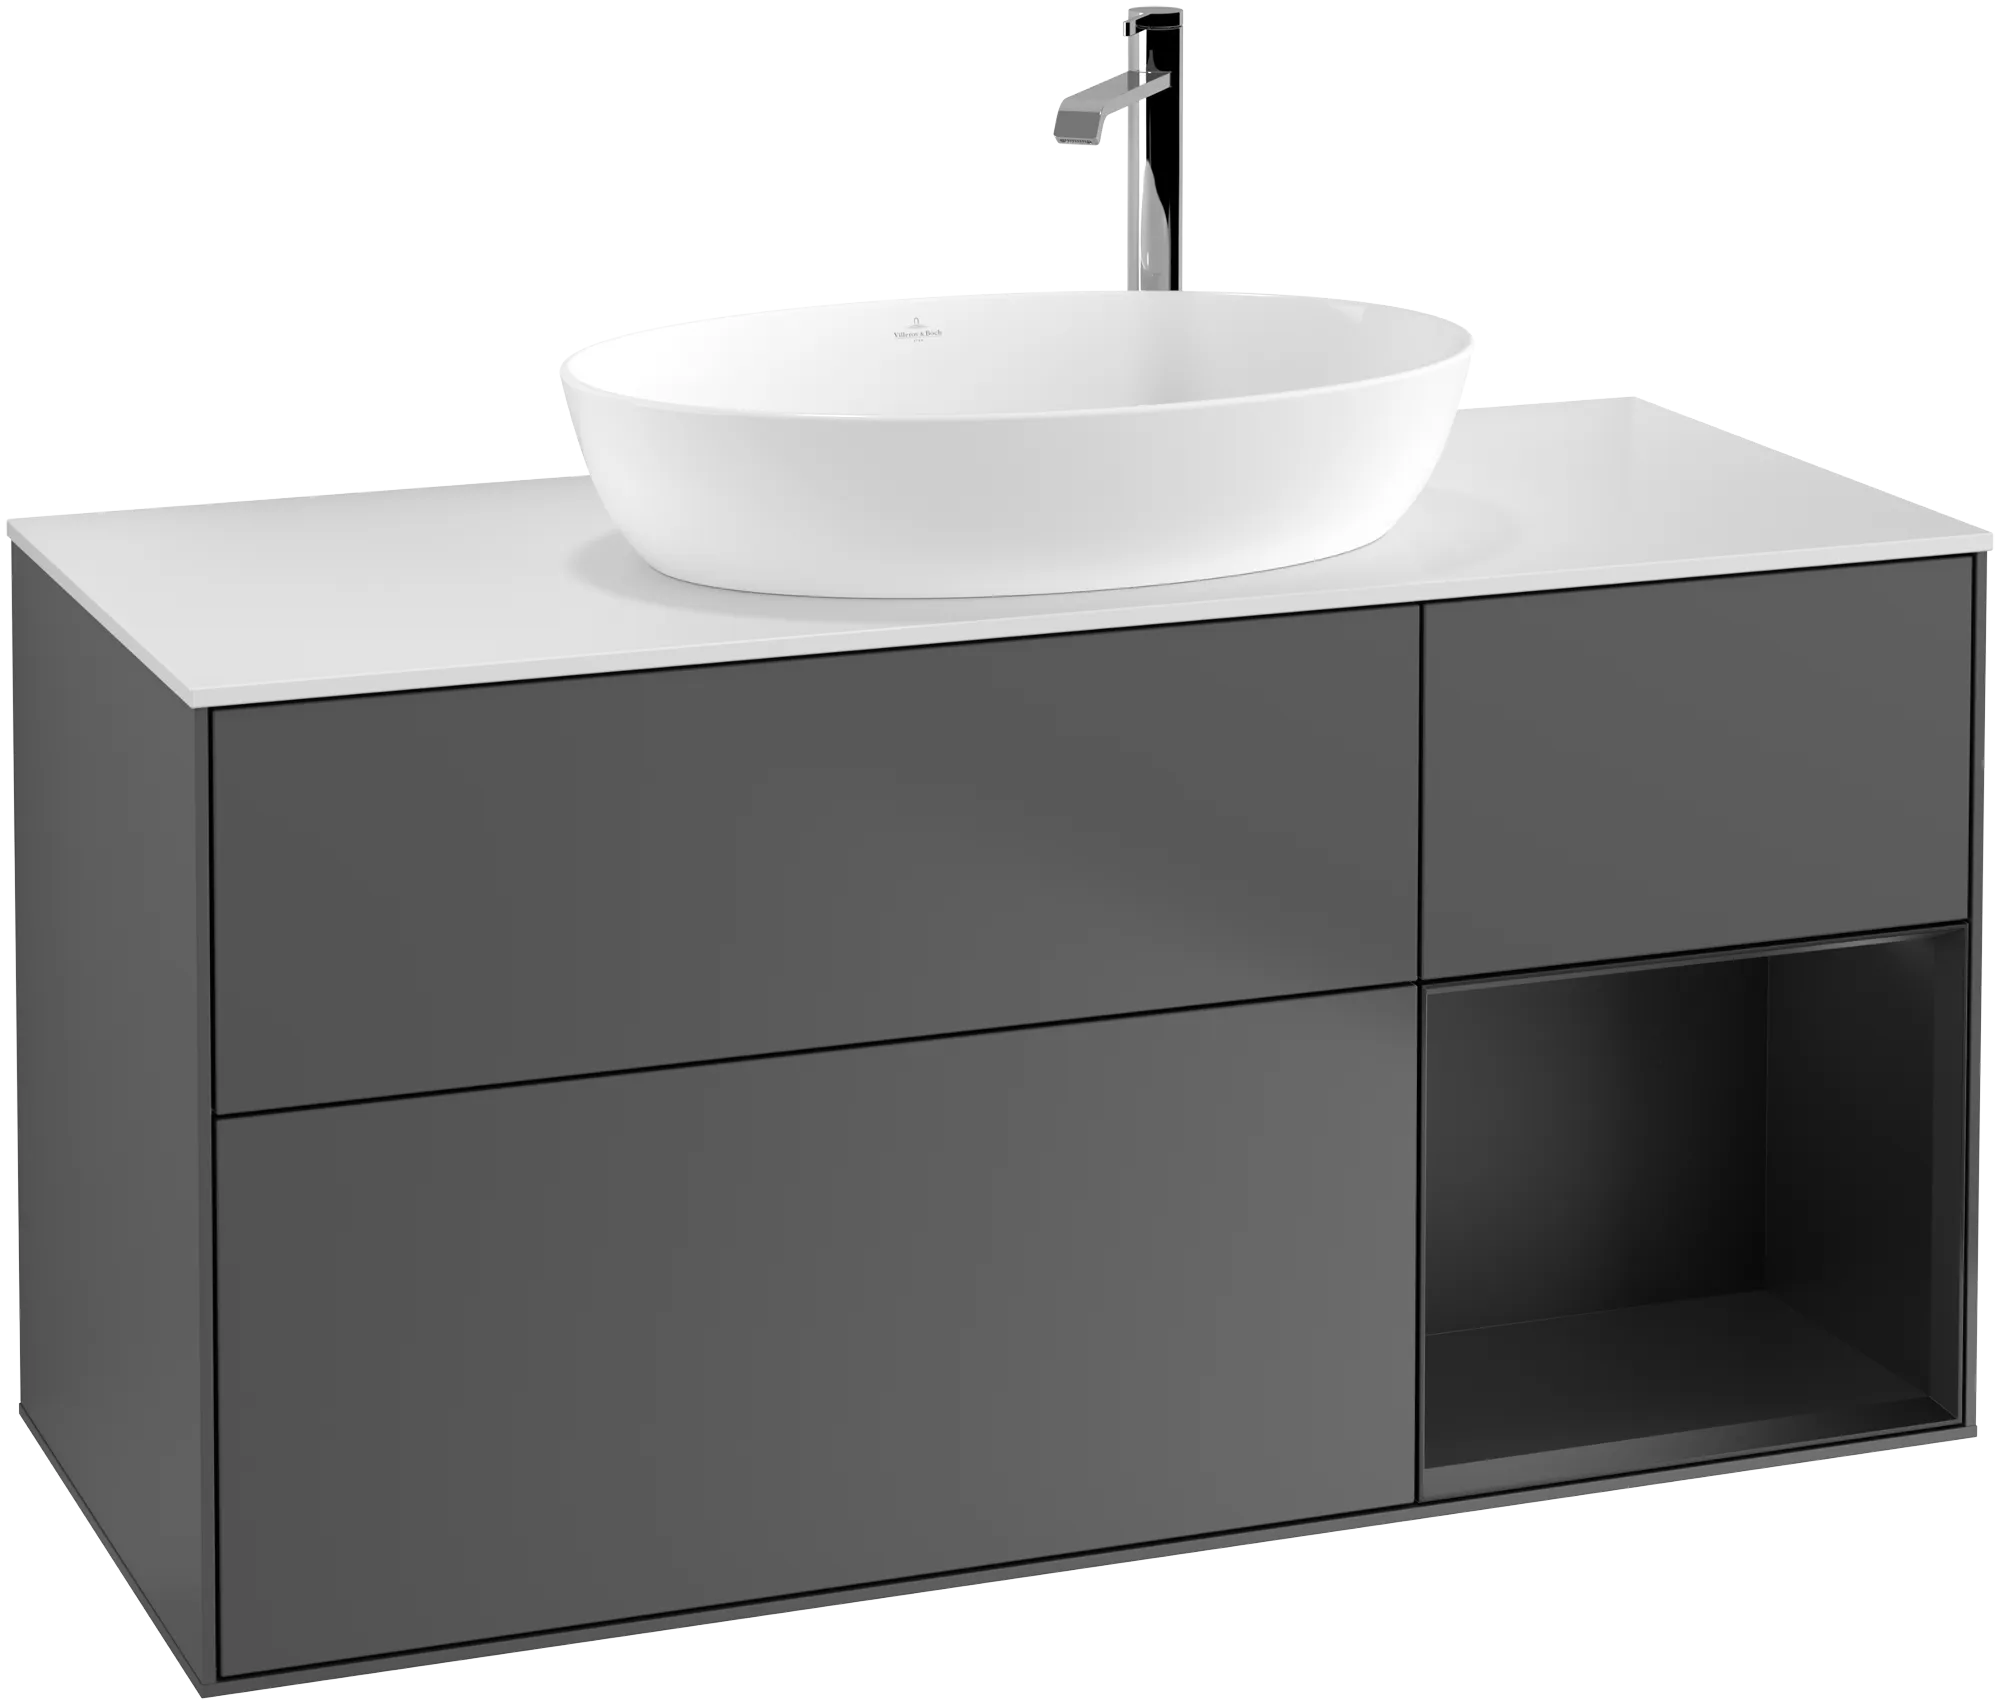 Picture of VILLEROY BOCH Finion Vanity unit, with lighting, 3 pull-out compartments, 1200 x 603 x 501 mm, Anthracite Matt Lacquer / Black Matt Lacquer / Glass White Matt #G951PDGK